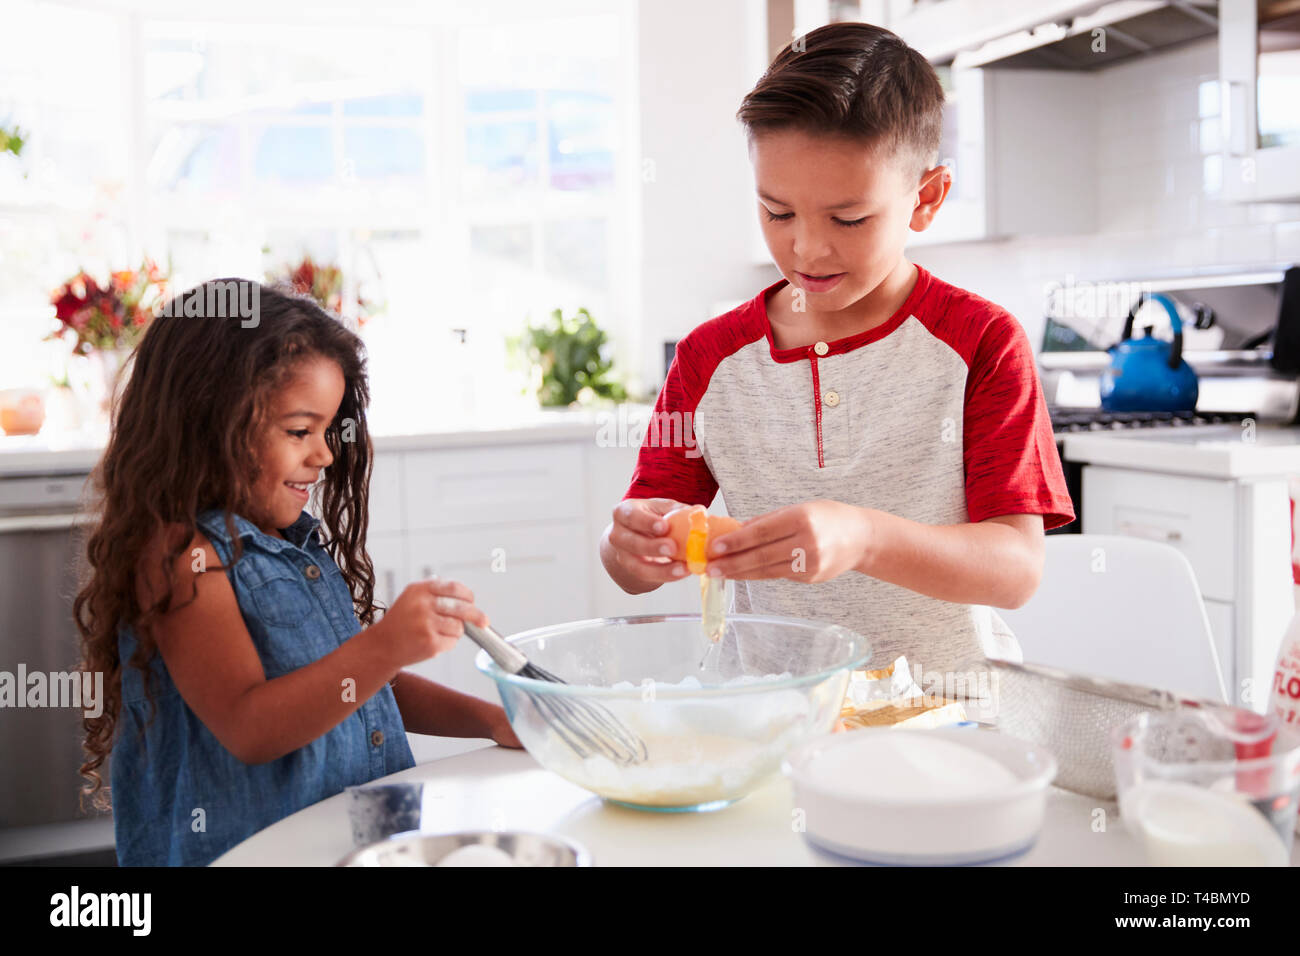 Brother and sister preparing cake mixture together at the kitchen table, waist up Stock Photo